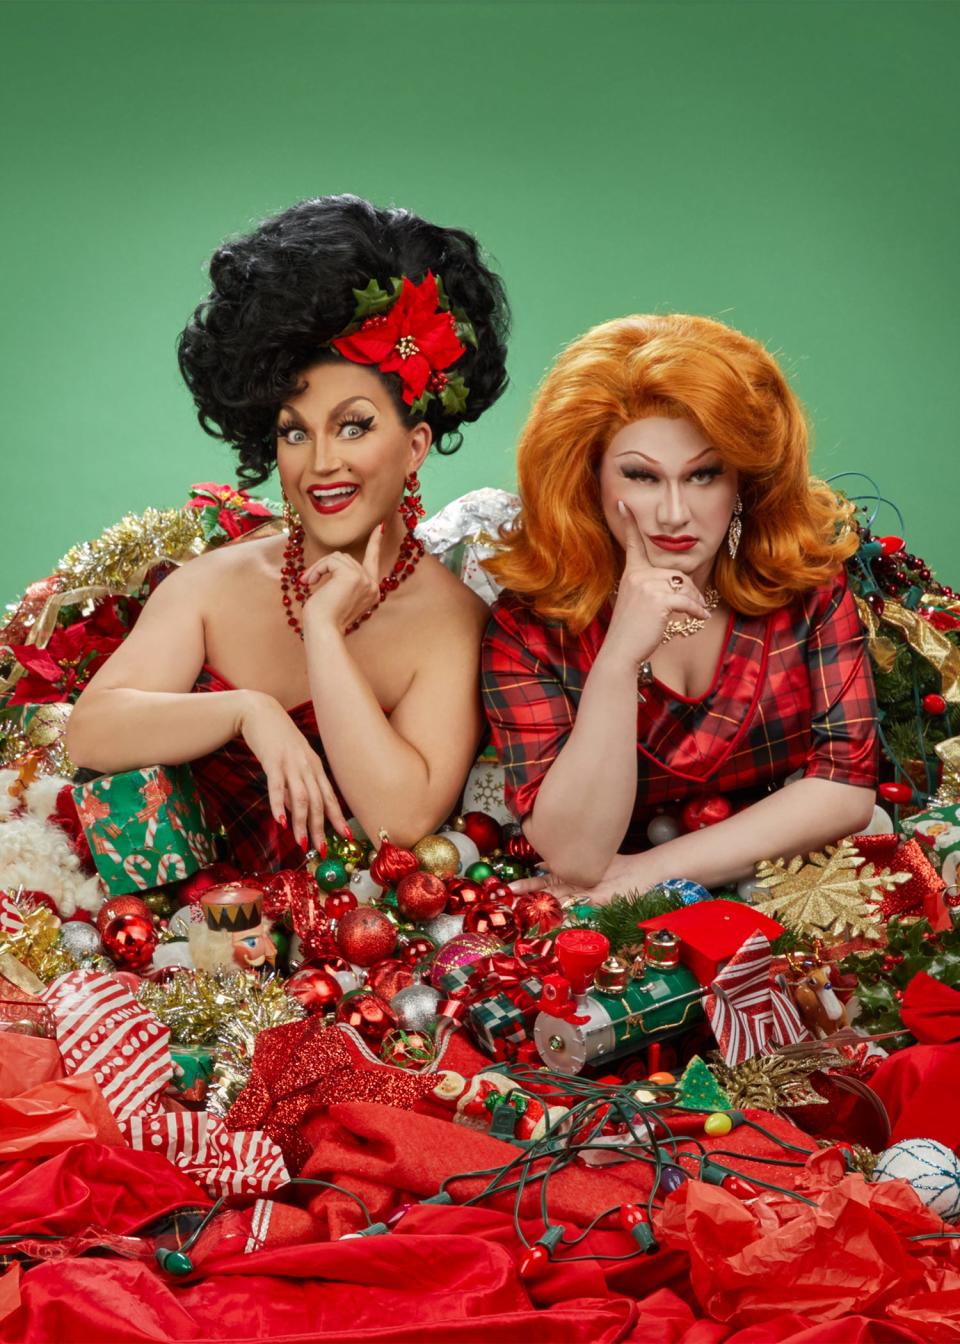 Drag queens BenDelaCreme and Jinkx Monsoon make the holidays merry and gay at the Paramount.